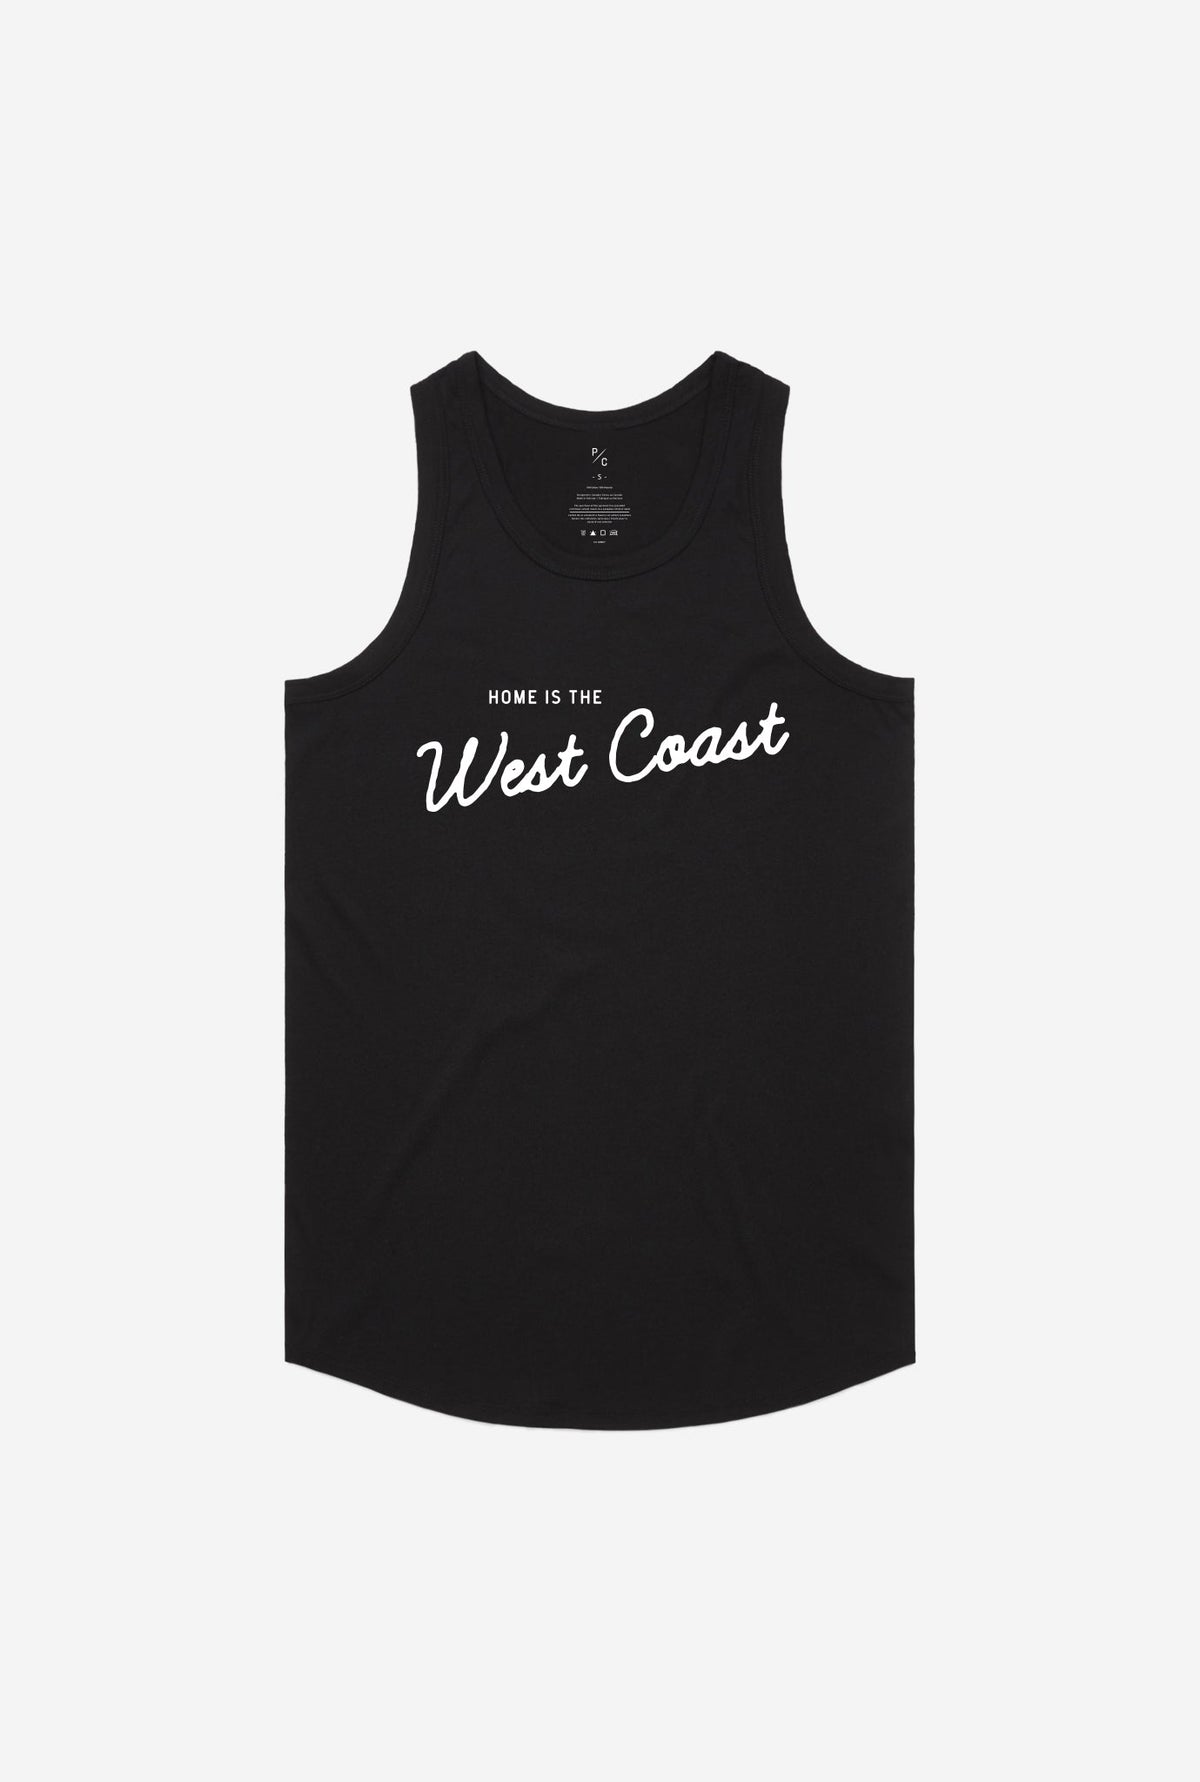 Home is the West Coast Tank - Black